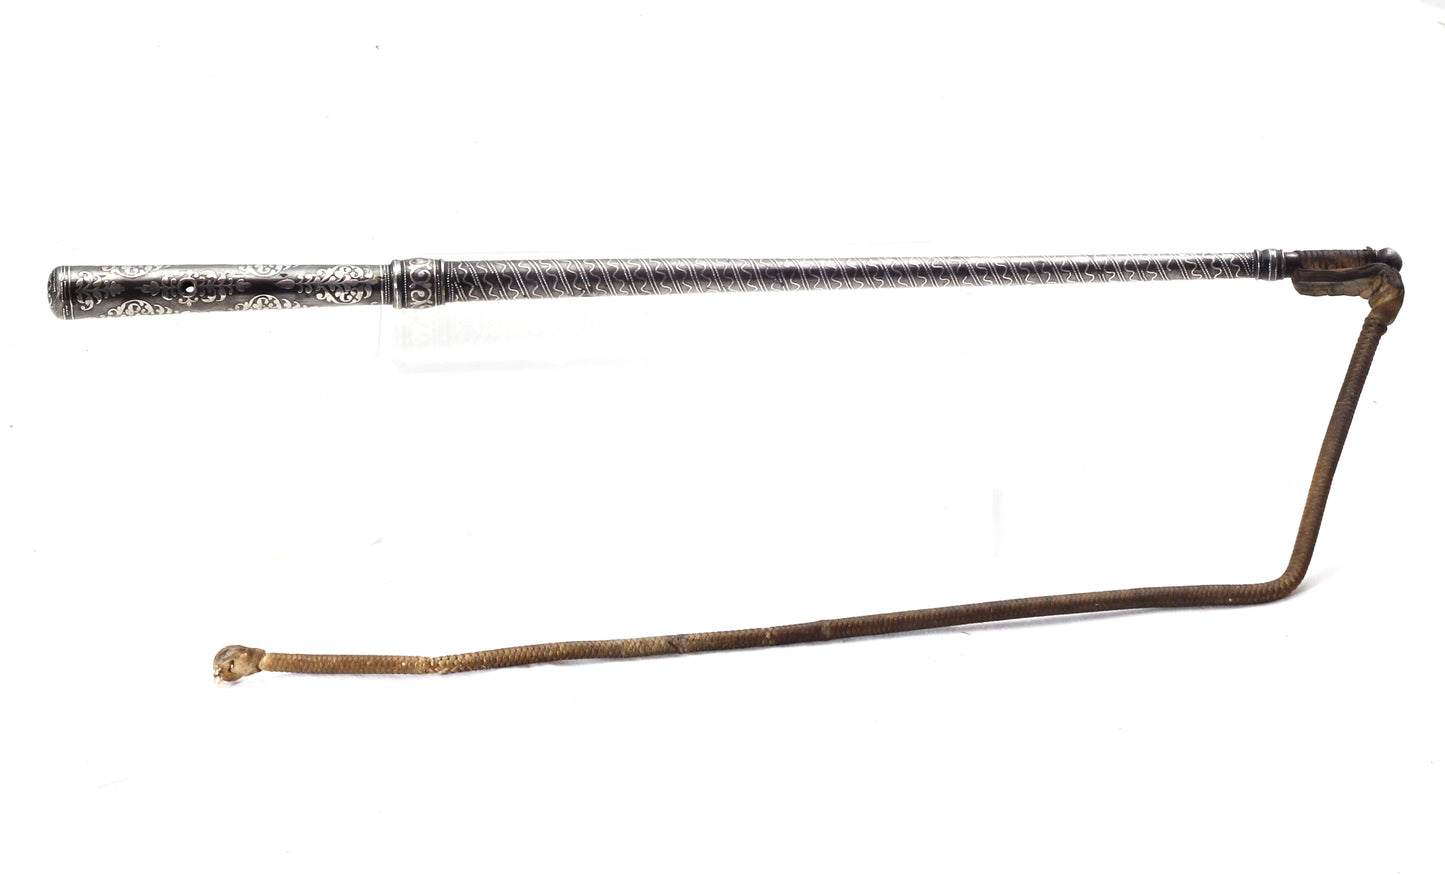 Silver Caucasian Riding Whip or Nagaika with Concealed Blade